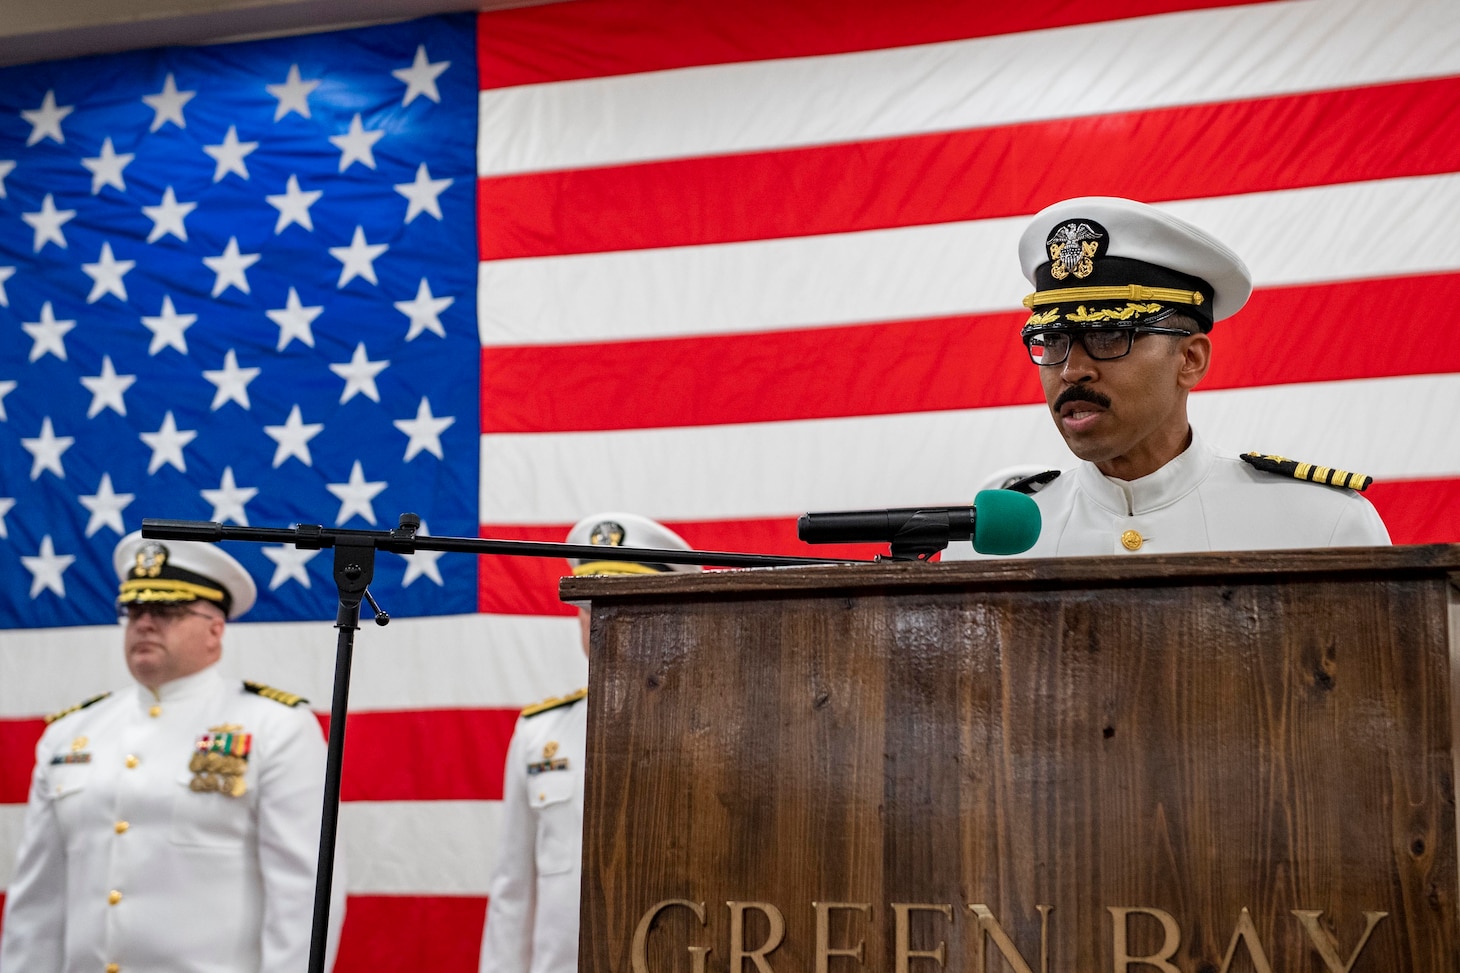 Capt. Severn B. Stevens, the new commanding officer of the forward-deployed amphibious transport dock ship USS Green Bay (LPD 20), gives remarks during his change-of-command ceremony in the ship’s vehicle stowage area. Green Bay, part of Amphibious Squadron 11, is operating in the U.S. 7th Fleet area of responsibility to enhance interoperability with allies and partners, and serve as a ready response force to defend peace and stability in the Indo-Pacific region. (U.S. Navy photo by Mass Communication Specialist Seaman Matthew Bakerian)